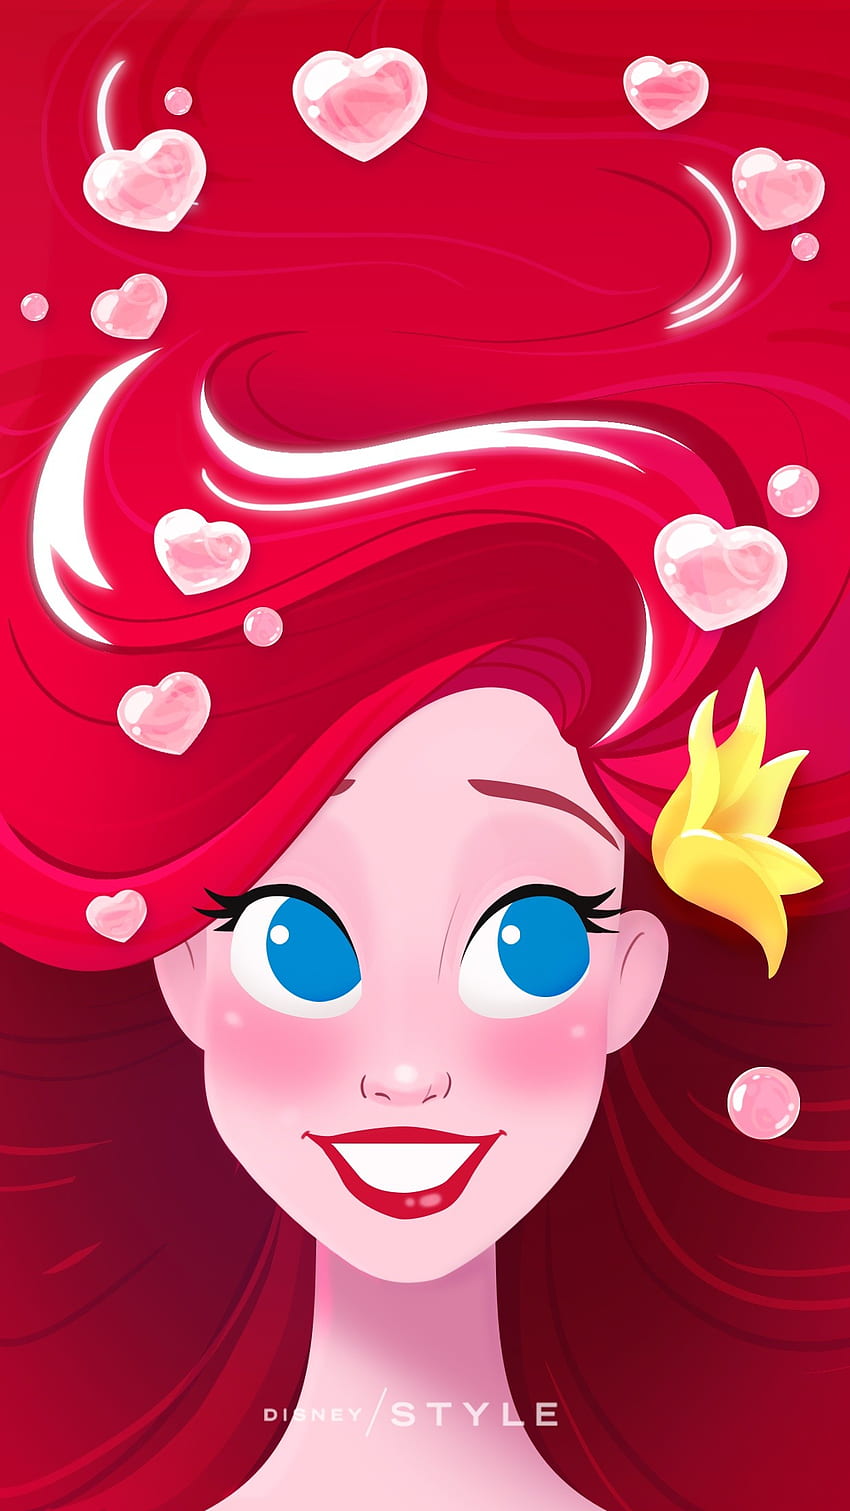 disneystyle: “ Go on and kiss the girl! Check out Disney Style for more Valentine's Day phone . HD phone wallpaper